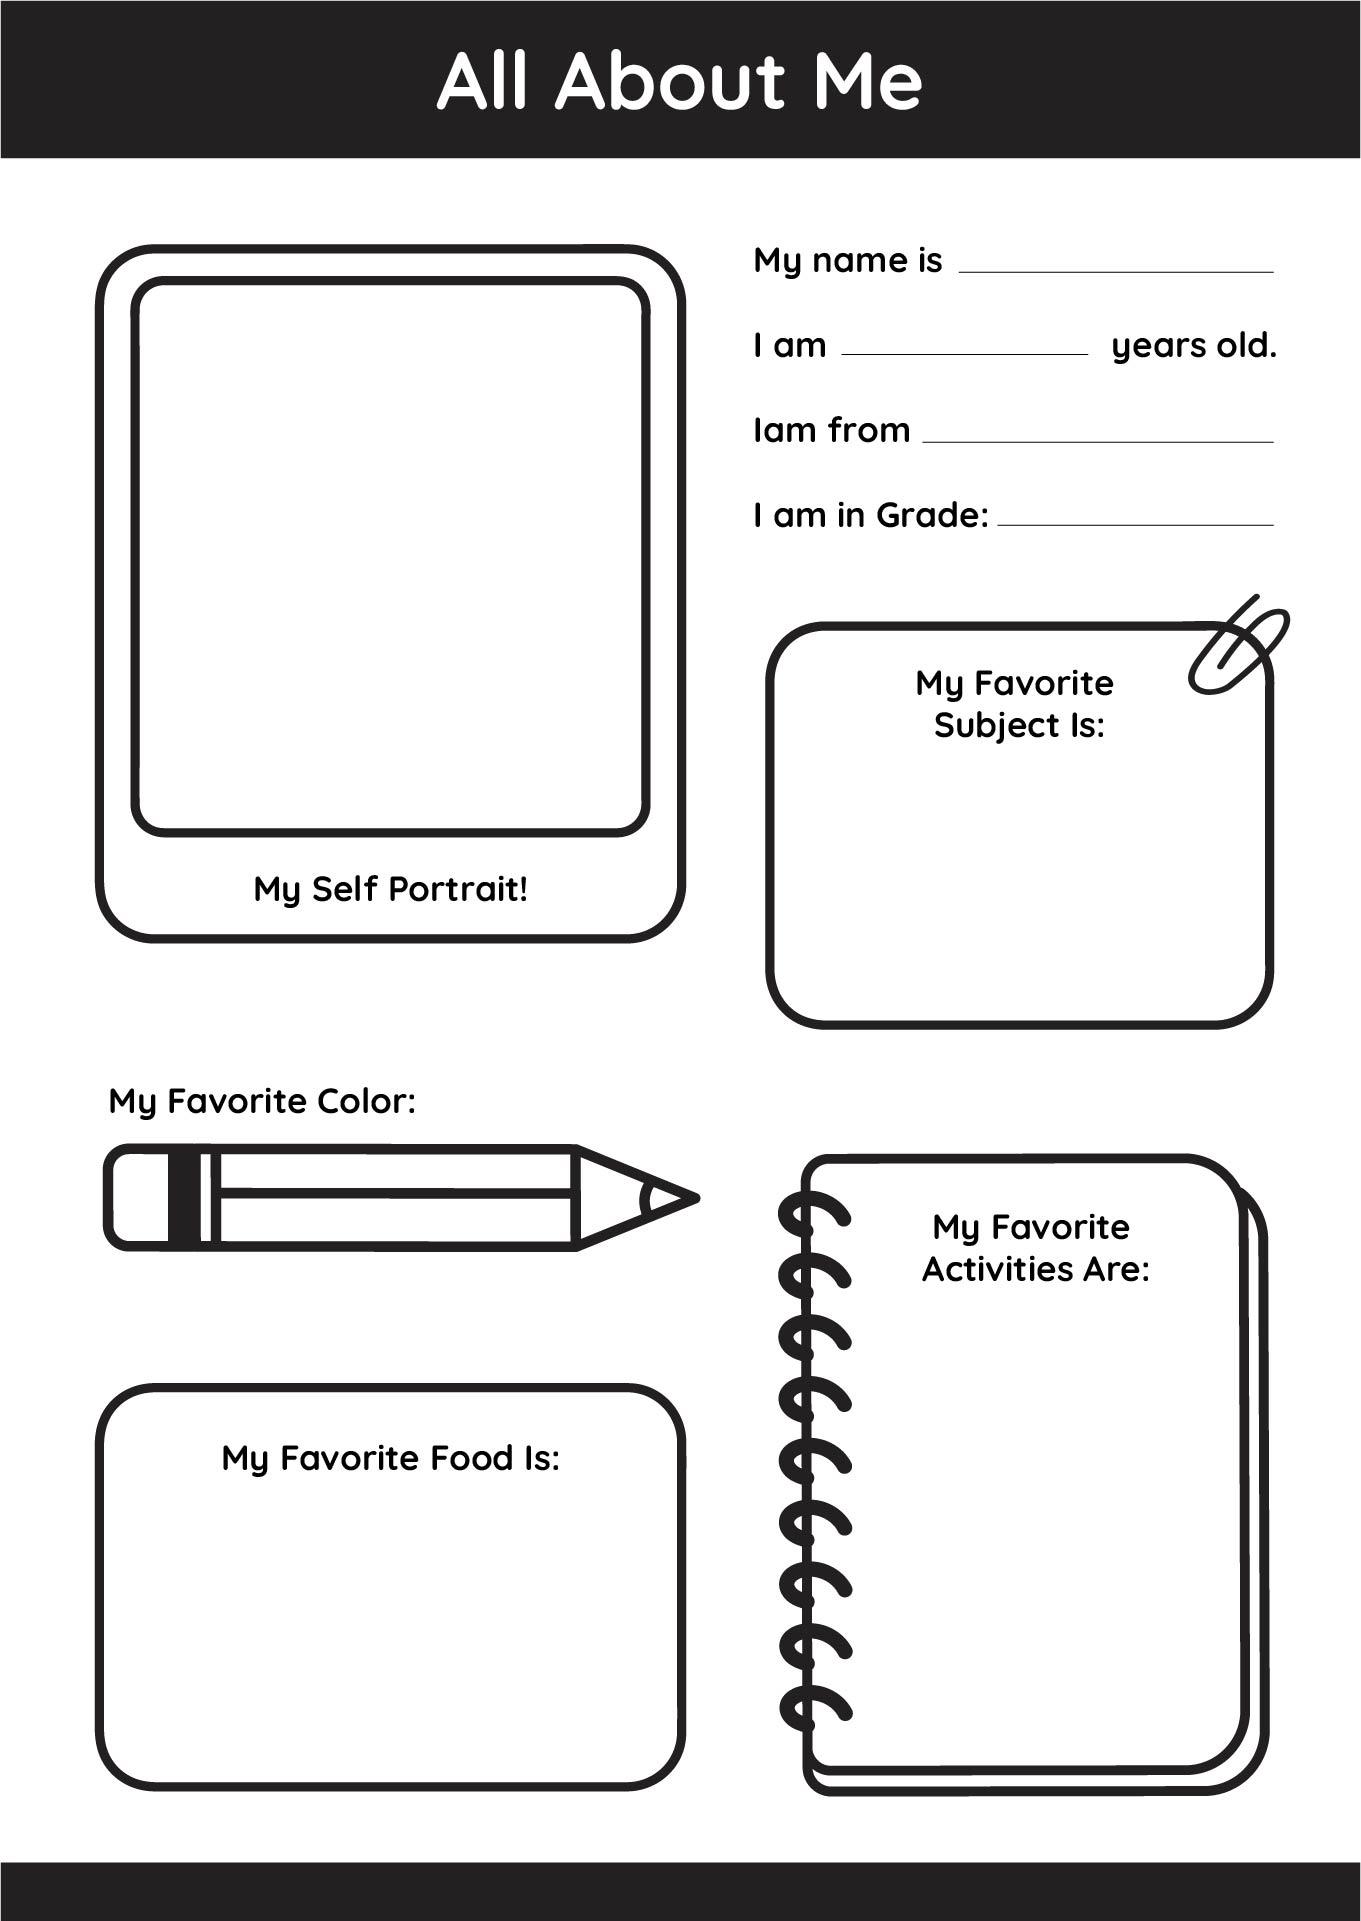 Preschool Printable Images Gallery Category Page 7